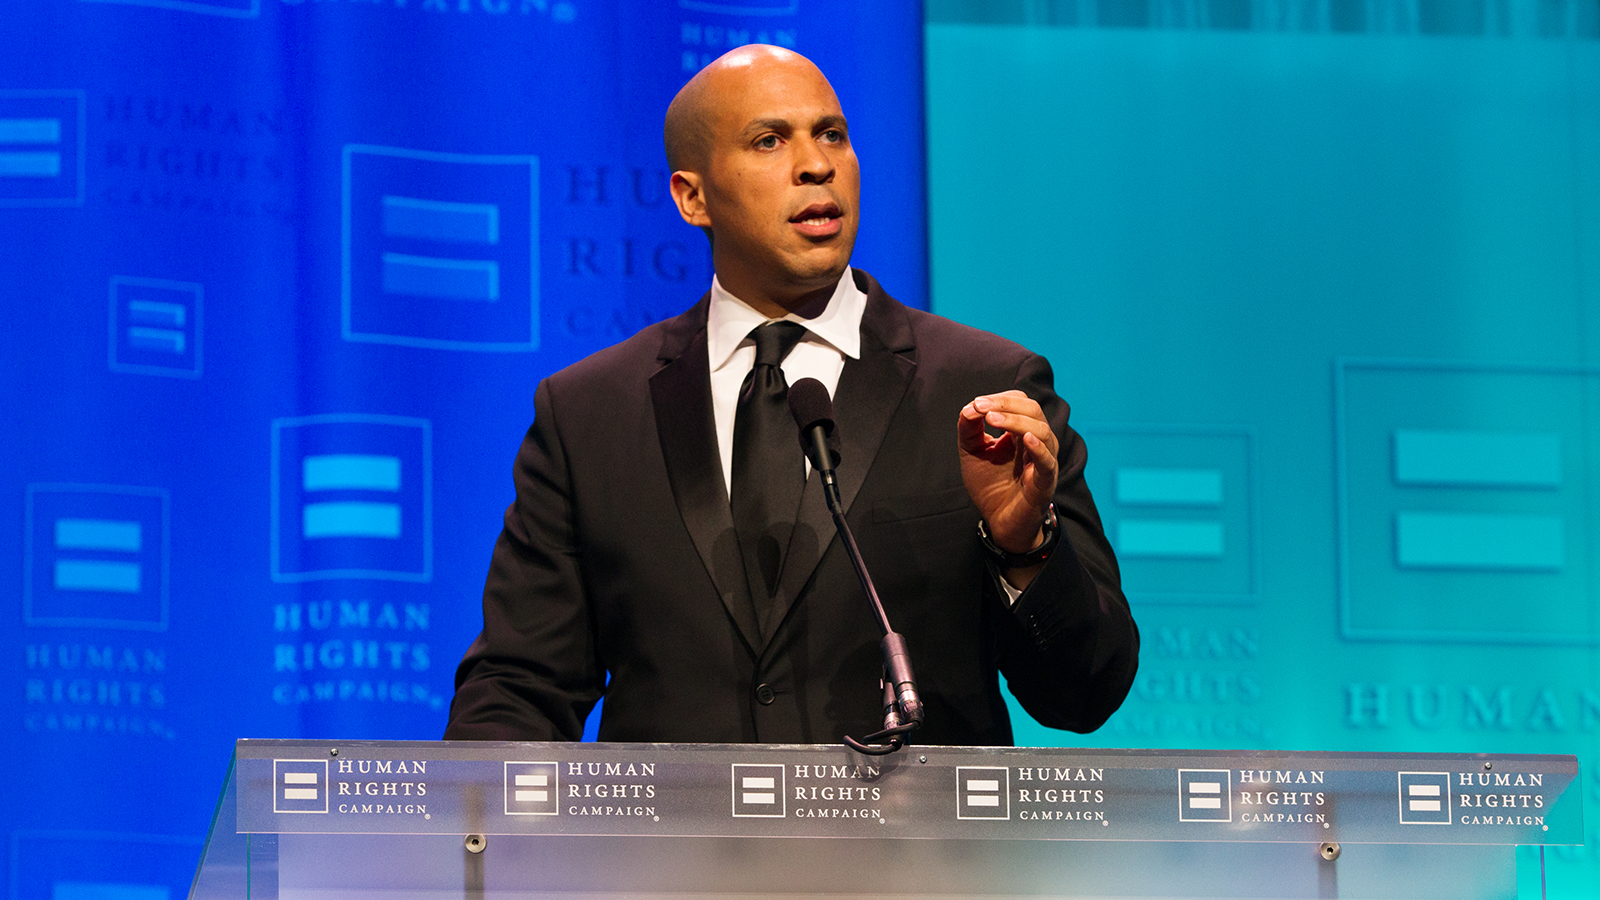 Monday: DNC Kicks off with a Host of Pro-Equality Speakers | Human